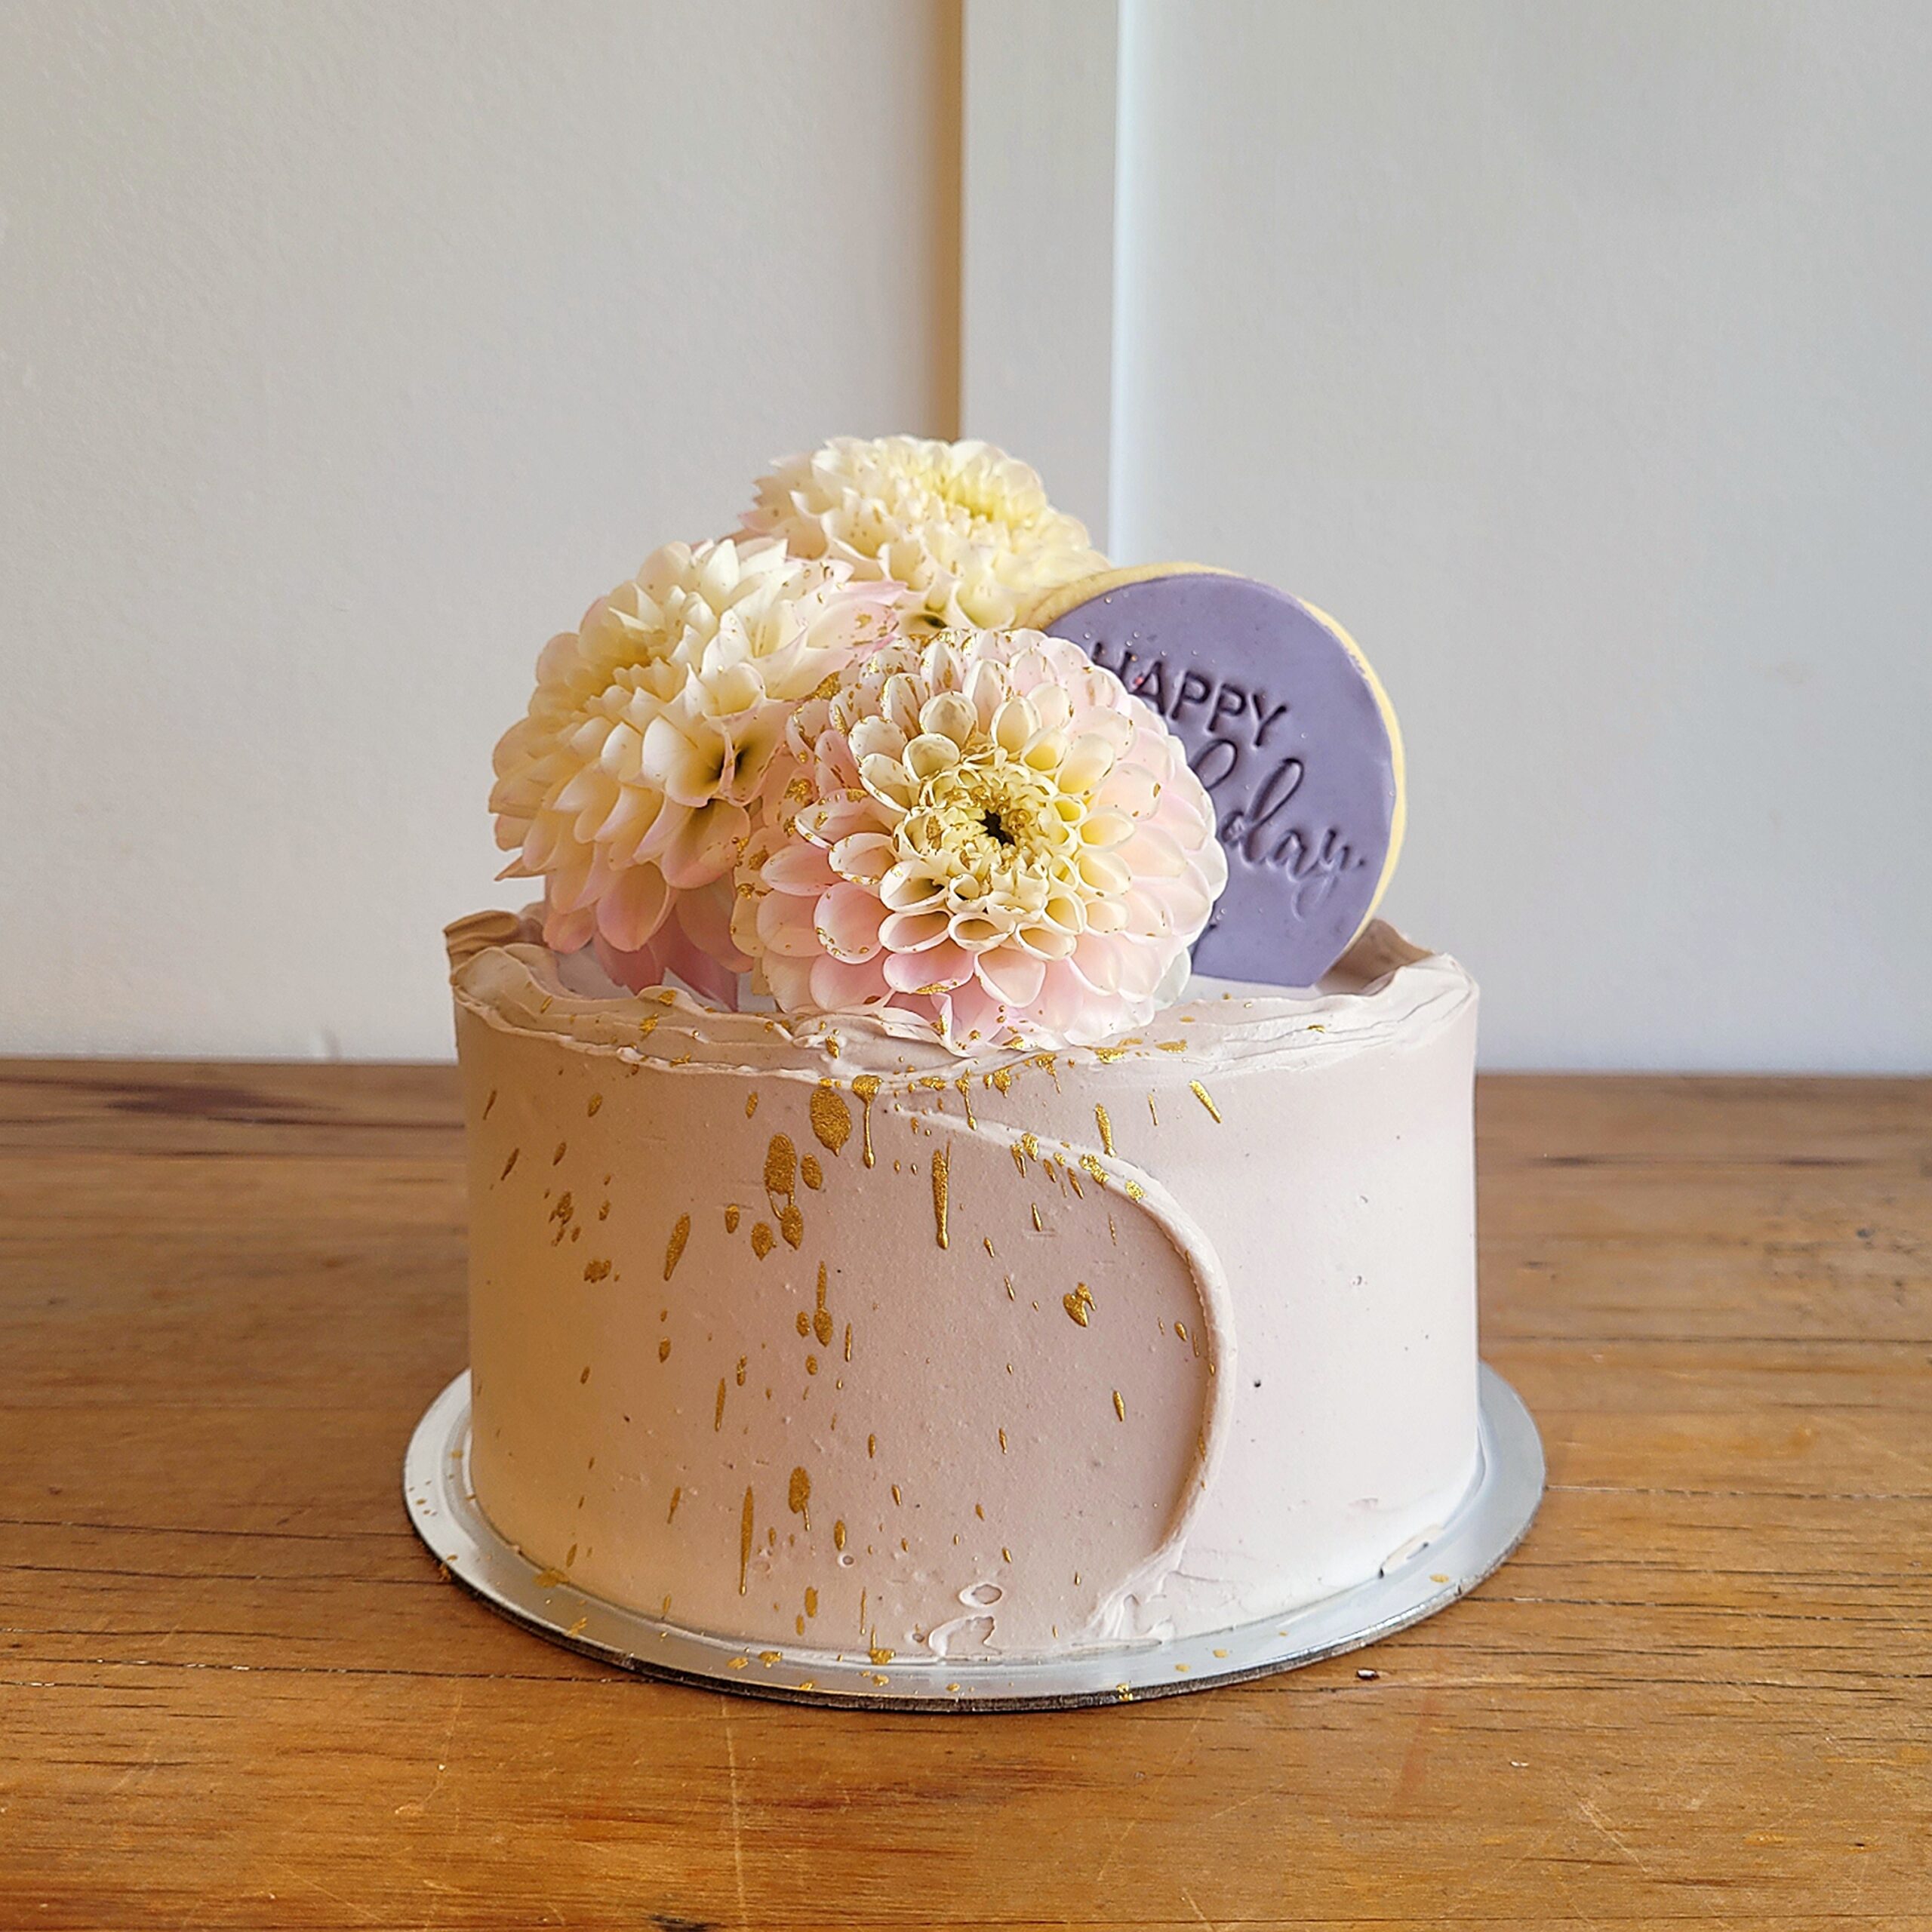 Pastel toned birthday cake decorated with edible gold, handmade macaroons,  and gold dust! : r/cakedecorating